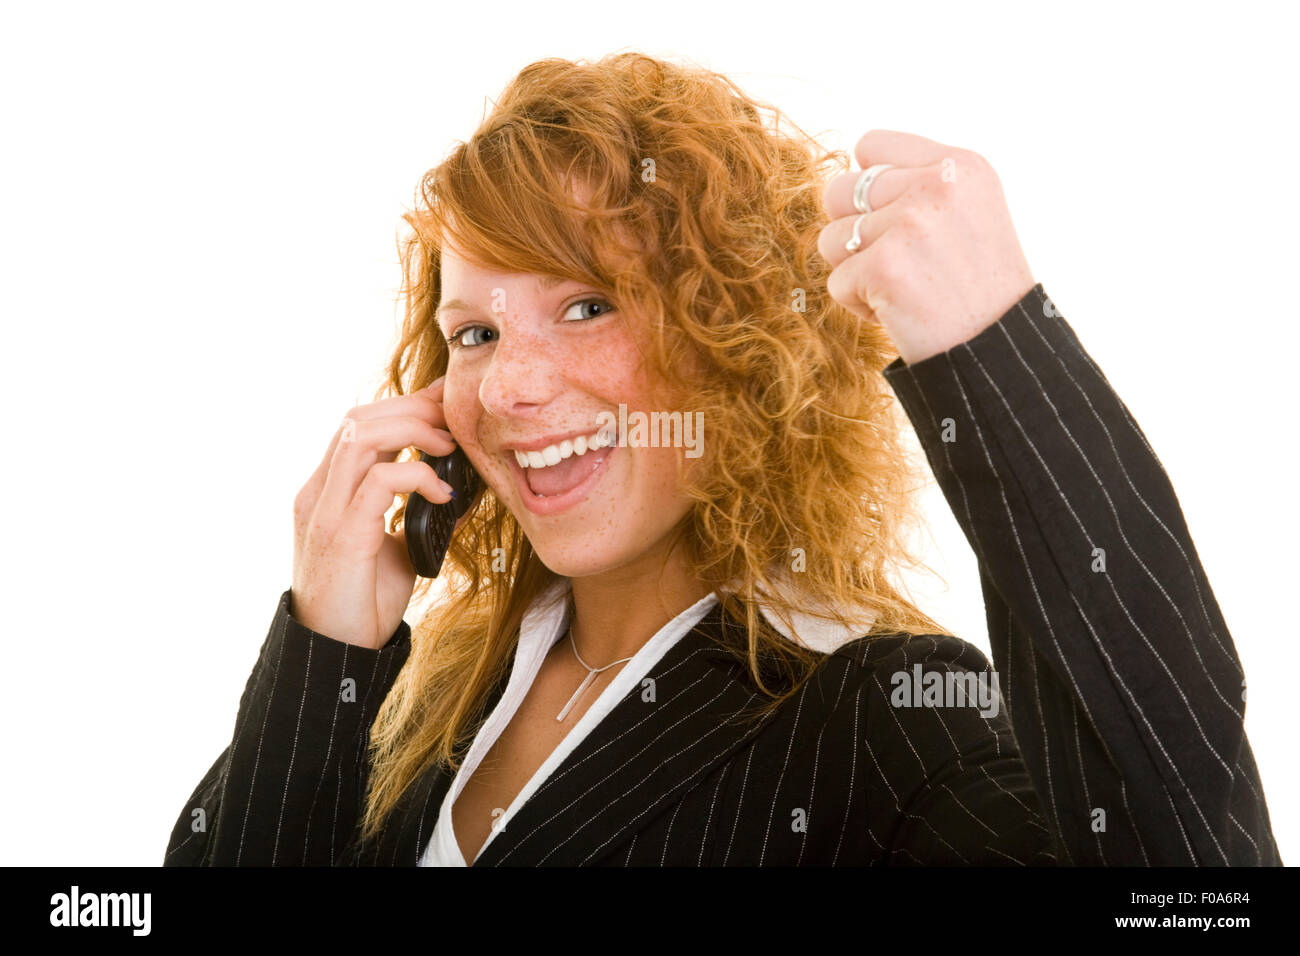 Young bussines woman with red hair cheering on cell phone Stock Photo